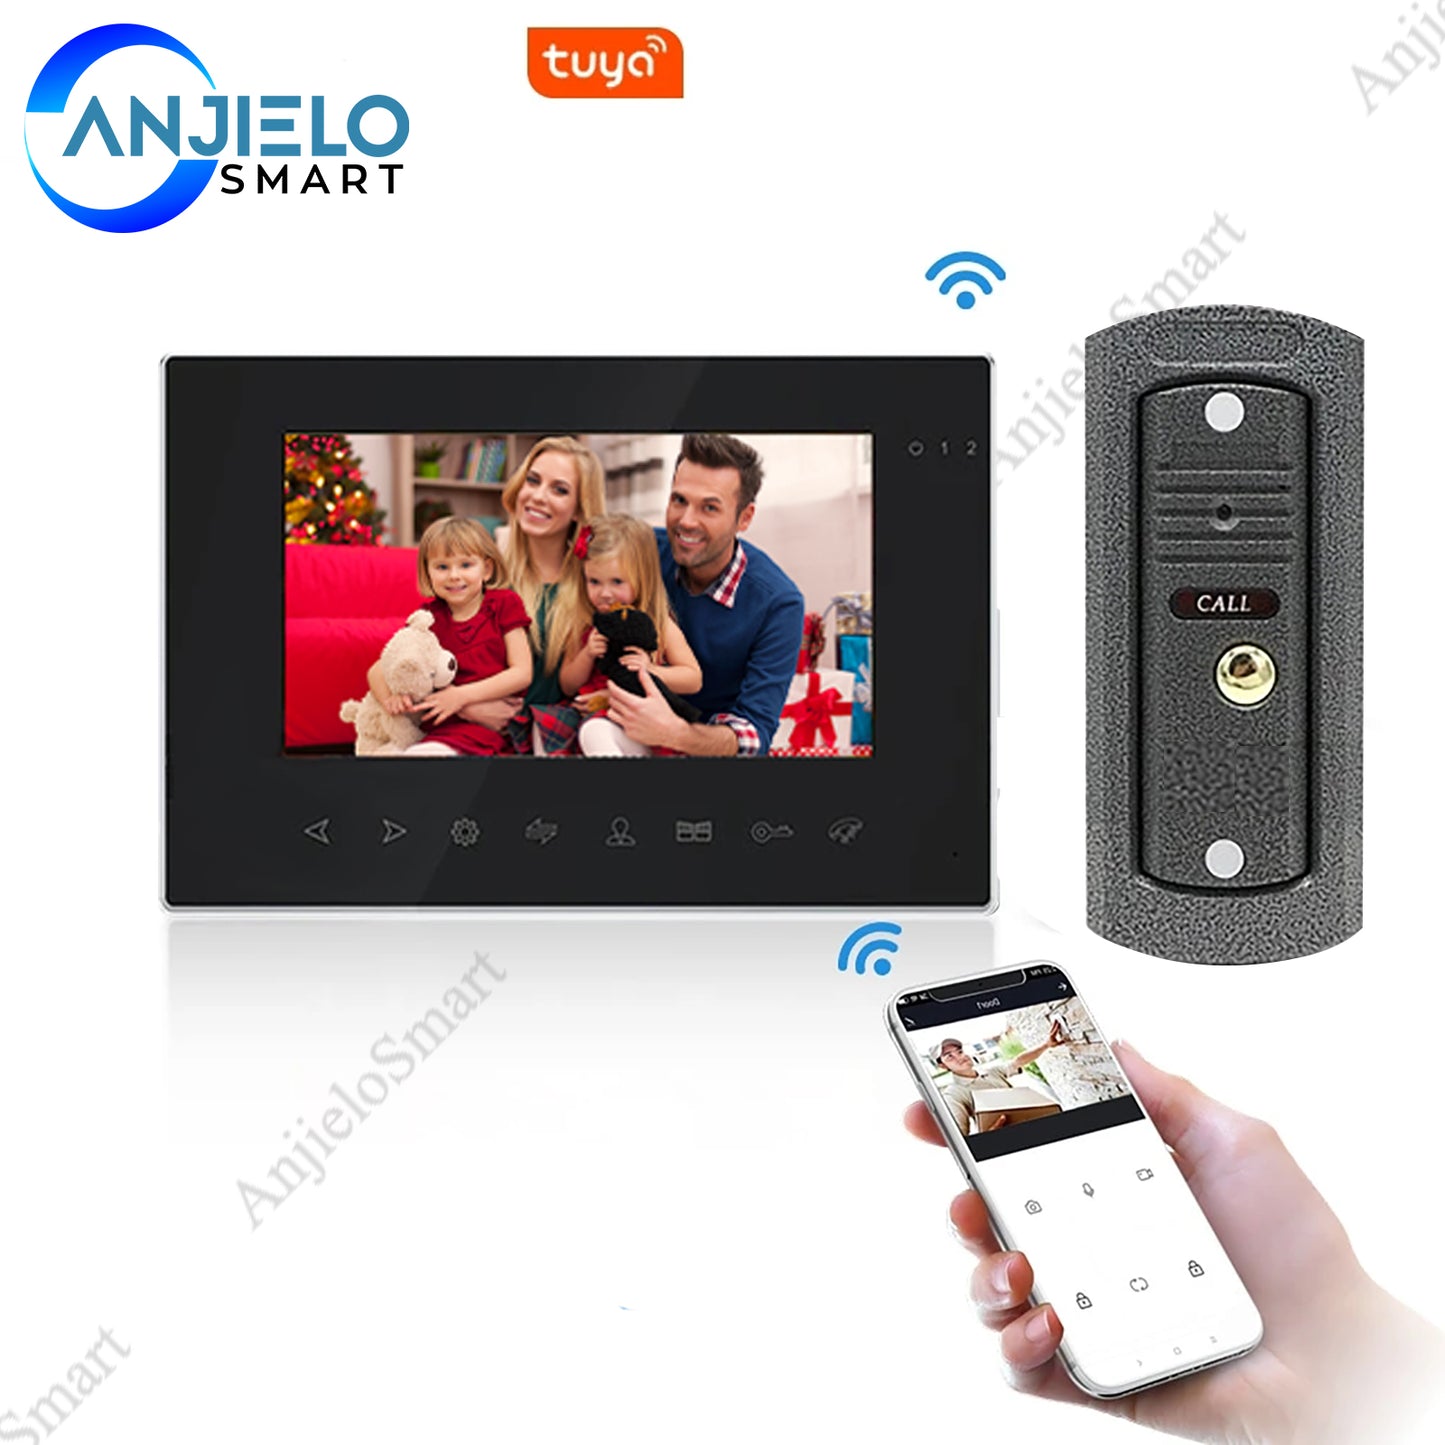 AnjieloSmart Tuya 7 Inch WiFi Video Door Phone Intercom System with AHD Wired Doorbell Camera Remote Motion Detection